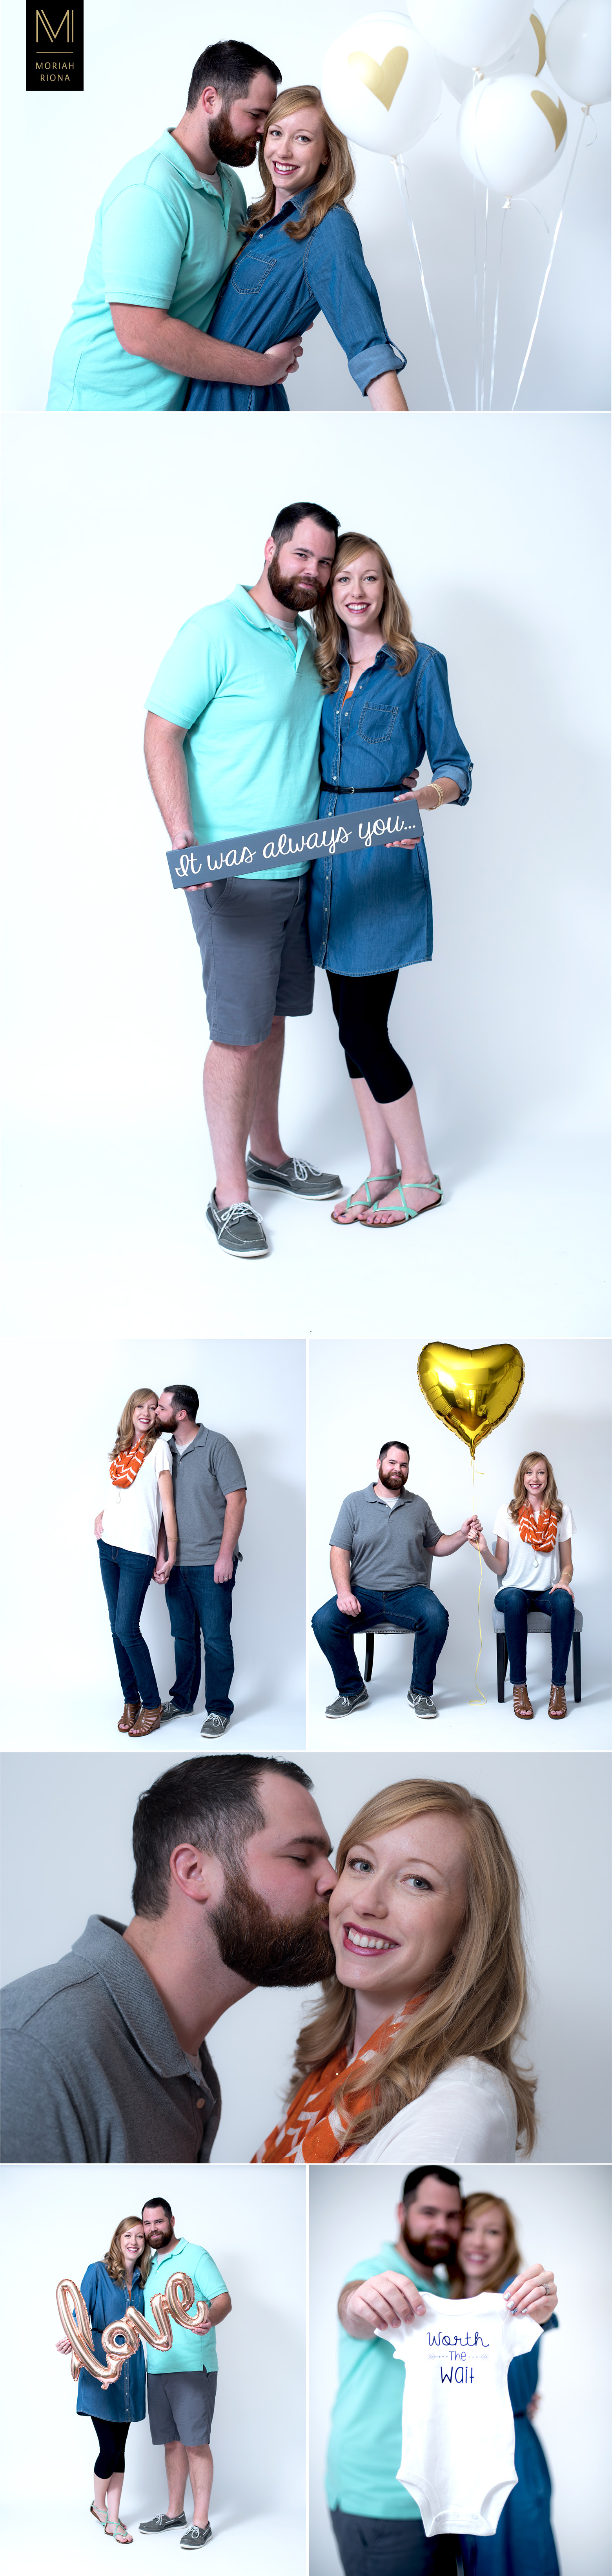 Adoption Announcement Photographs by Colorado Springs photographer, Moriah Riona. John & Melody Adopt, couples photography in studio for Adoption fundraising website with gold balloons and etsy props.